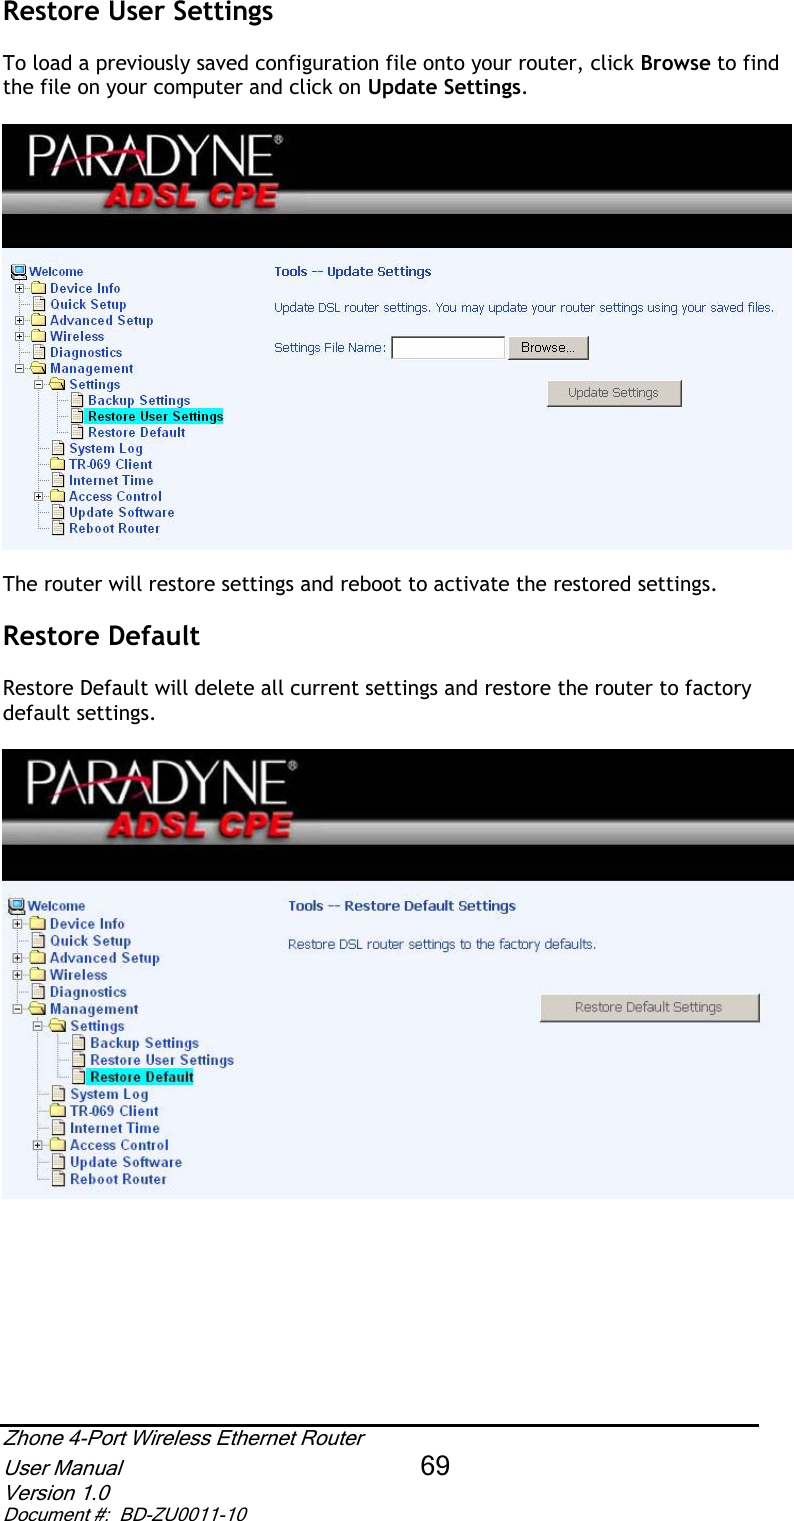 Restore User Settings  To load a previously saved configuration file onto your router, click Browse to find the file on your computer and click on Update Settings.The router will restore settings and reboot to activate the restored settings.  Restore Default  Restore Default will delete all current settings and restore the router to factory default settings. Zhone 4-Port Wireless Ethernet Router User Manual 69Version 1.0 Document #:  BD-ZU0011-10